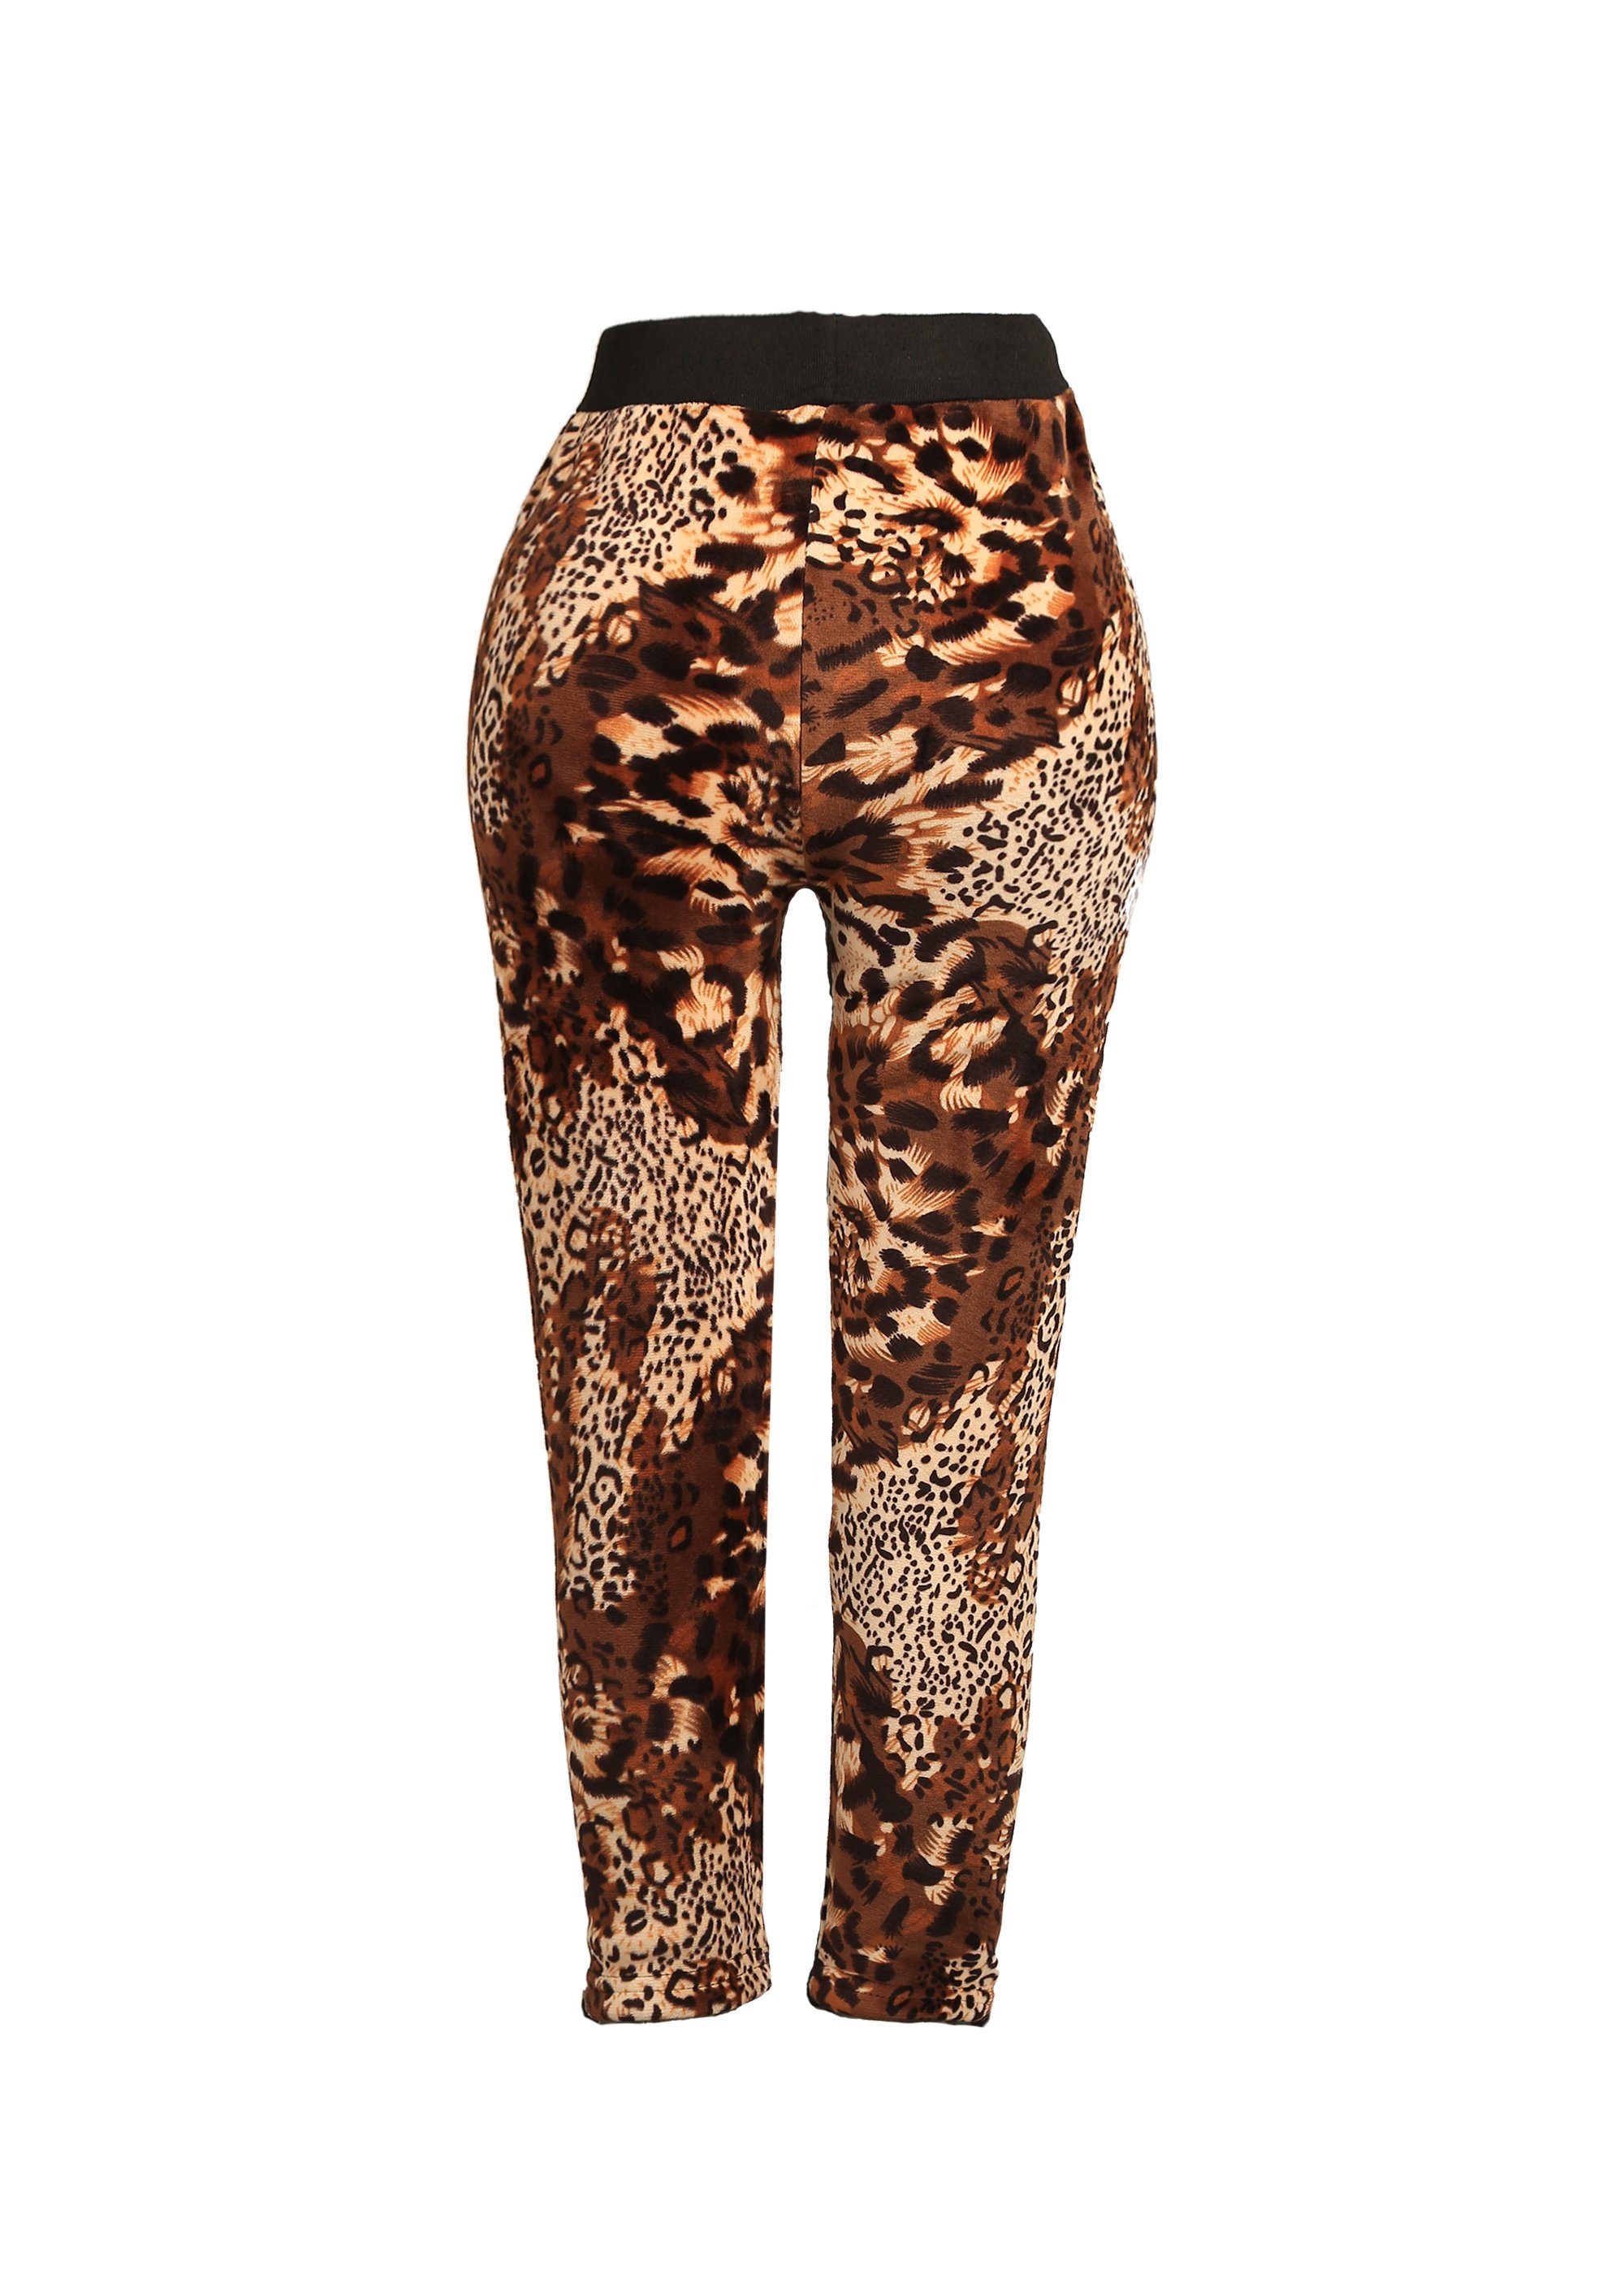 Family coolem Trends mit Thermoleggings Leopardenmuster